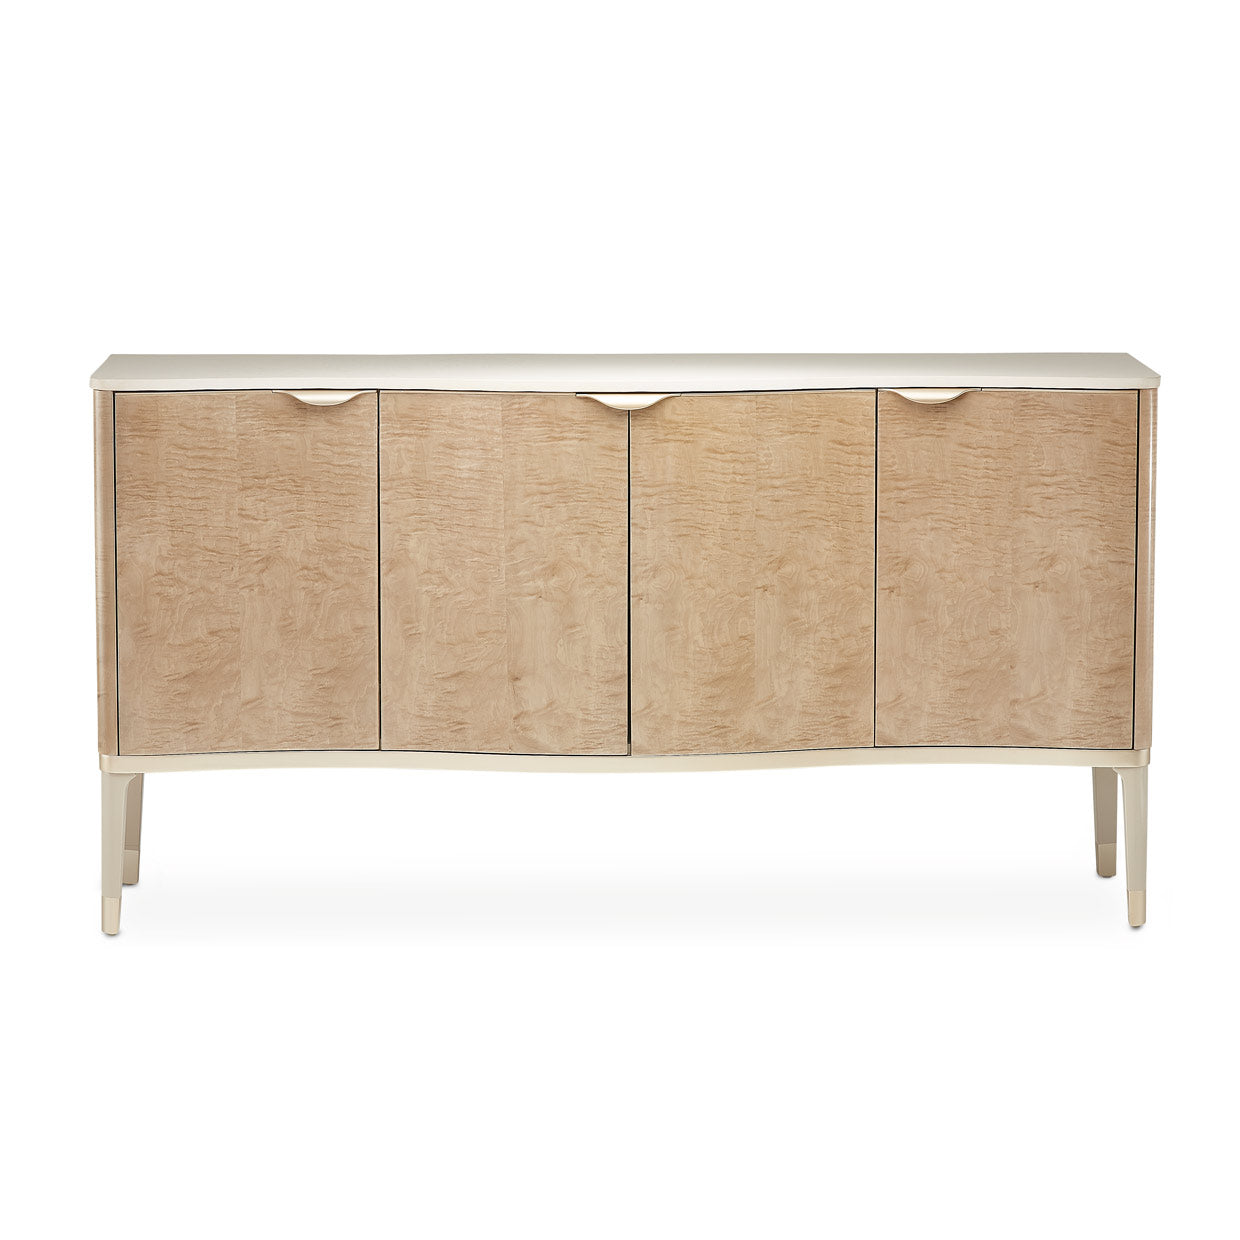 Sideboard Blush, Malibu Crest Sideboard, Dining space accent, Caramel finish, Chardonnay finish, Modern silhouette, Spacious interior, Velvet lined silverware drawer, Cultured marble top, Hardwood solids, Maple veneer, Blush finish, Waterfall pulls, Connected design, Velvet lined drawer, Chardonnay accents, Creamy Pearl finish, Pearl toned cultured marble, Dining room storage, Modern style accent piece, dream art, Michael amini